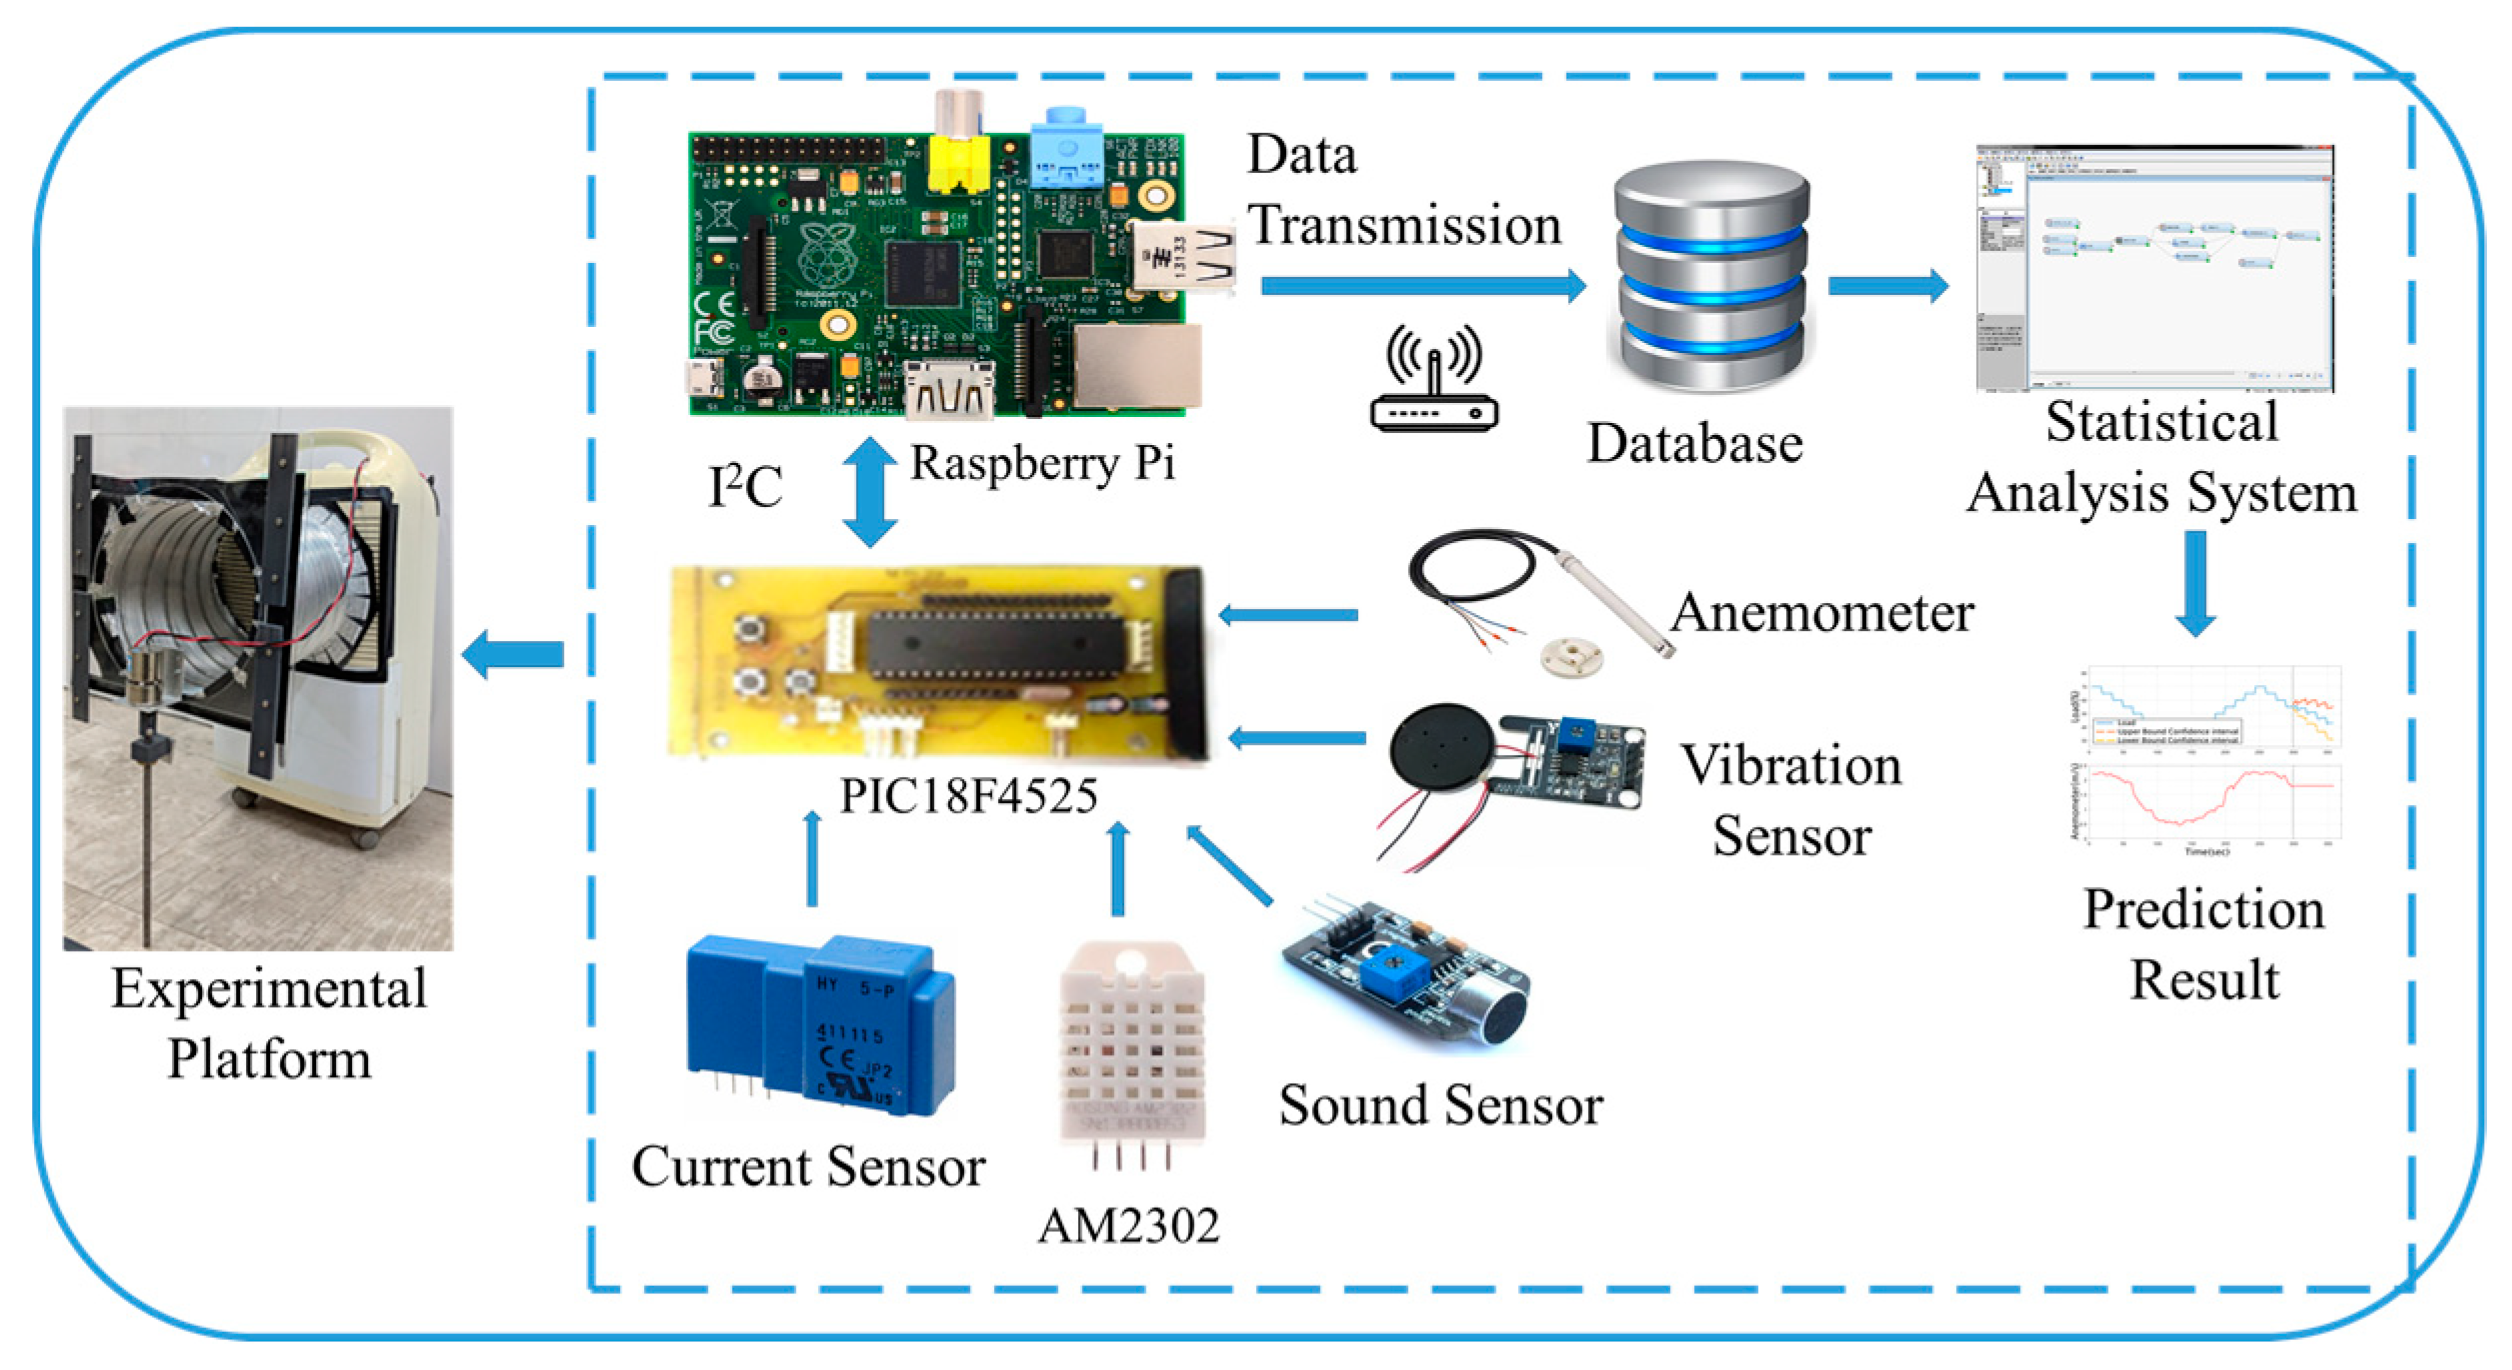 Image of Raspberry Pi computer being used to collect data from sensors